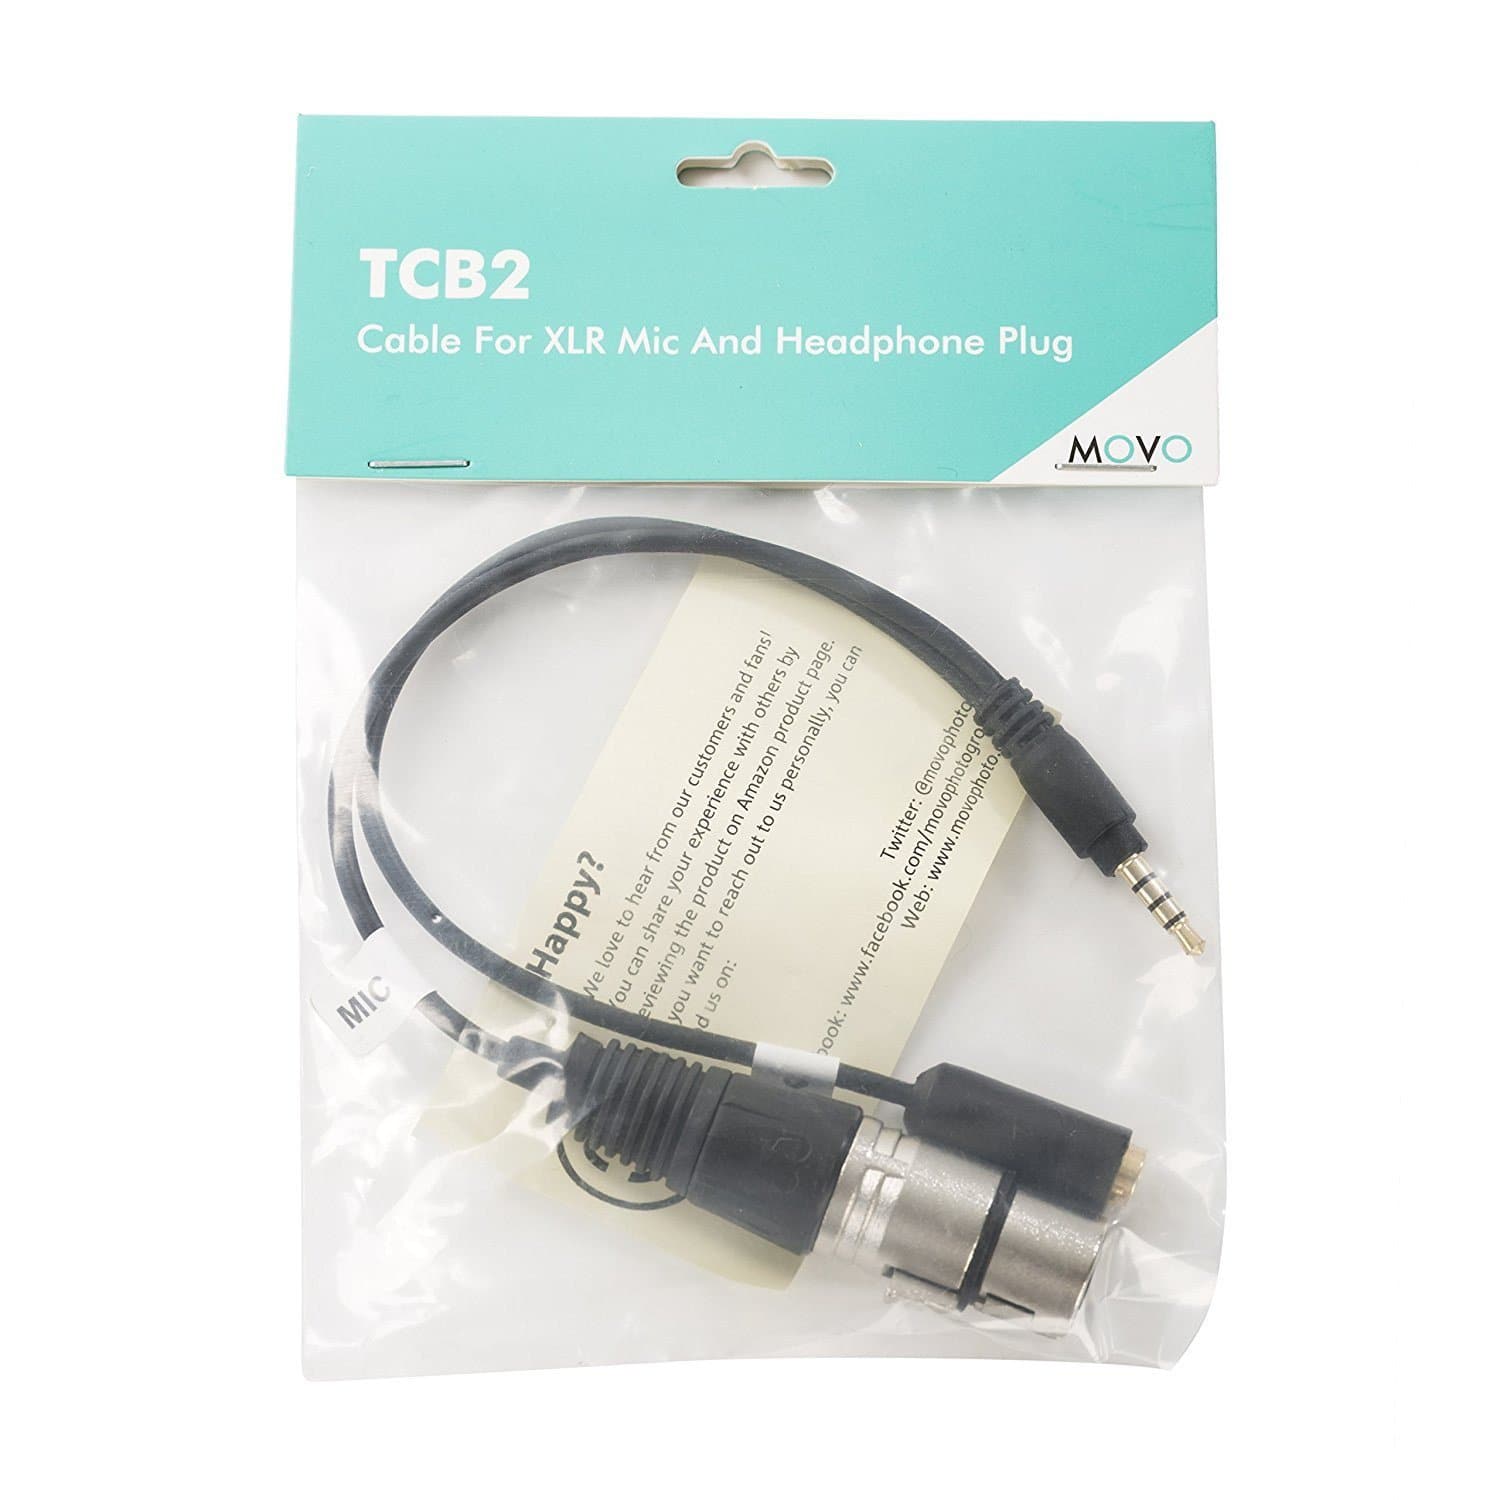 XLR (F) Mic to TRRS (M) Smartphone Adapter | TCB2 | Movo - Movo